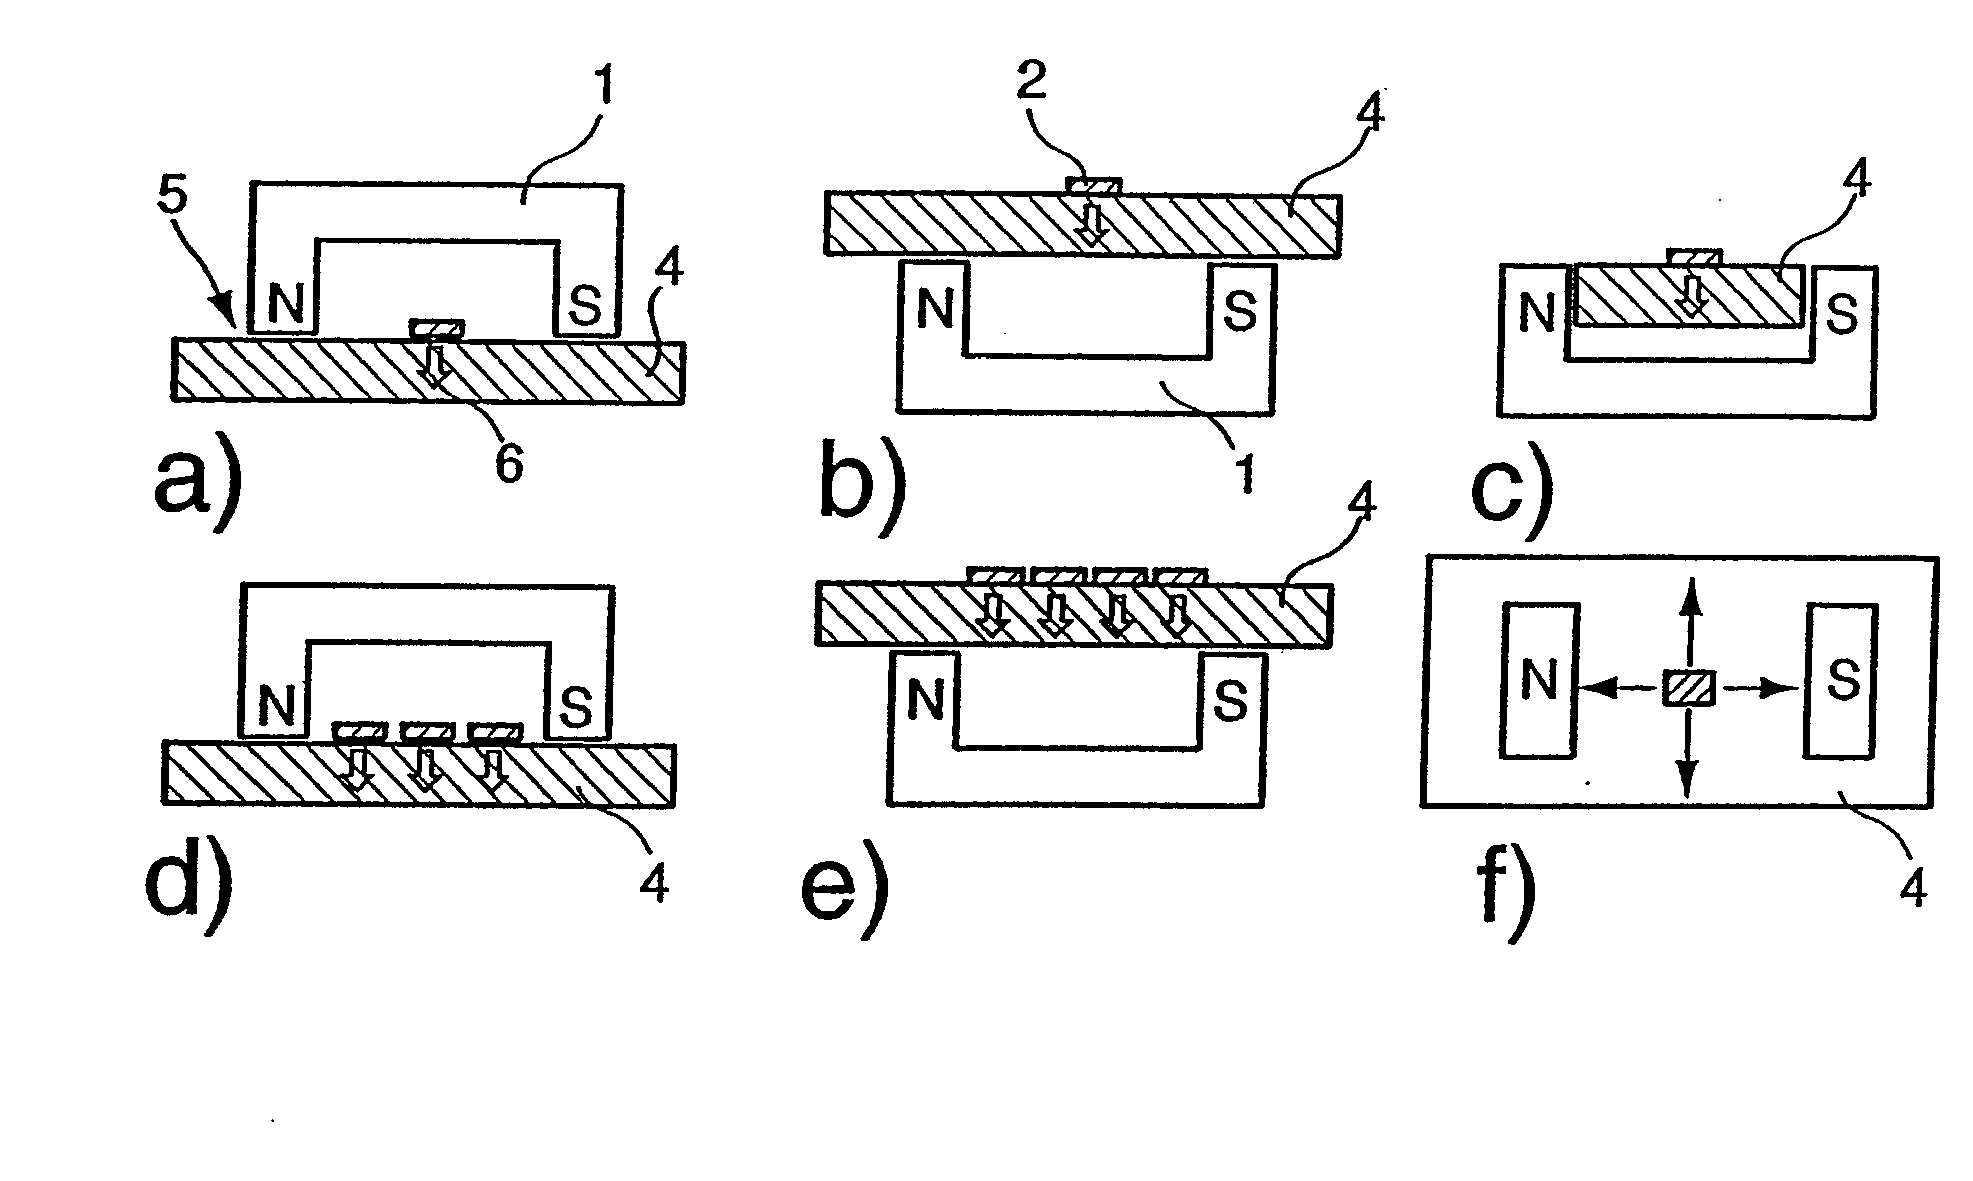 Device and Method for the Material Testing and/or Thickness Measurements of a Test Object That Contains at Least Fractions of Electrically Conductive and Ferromagnetic Material